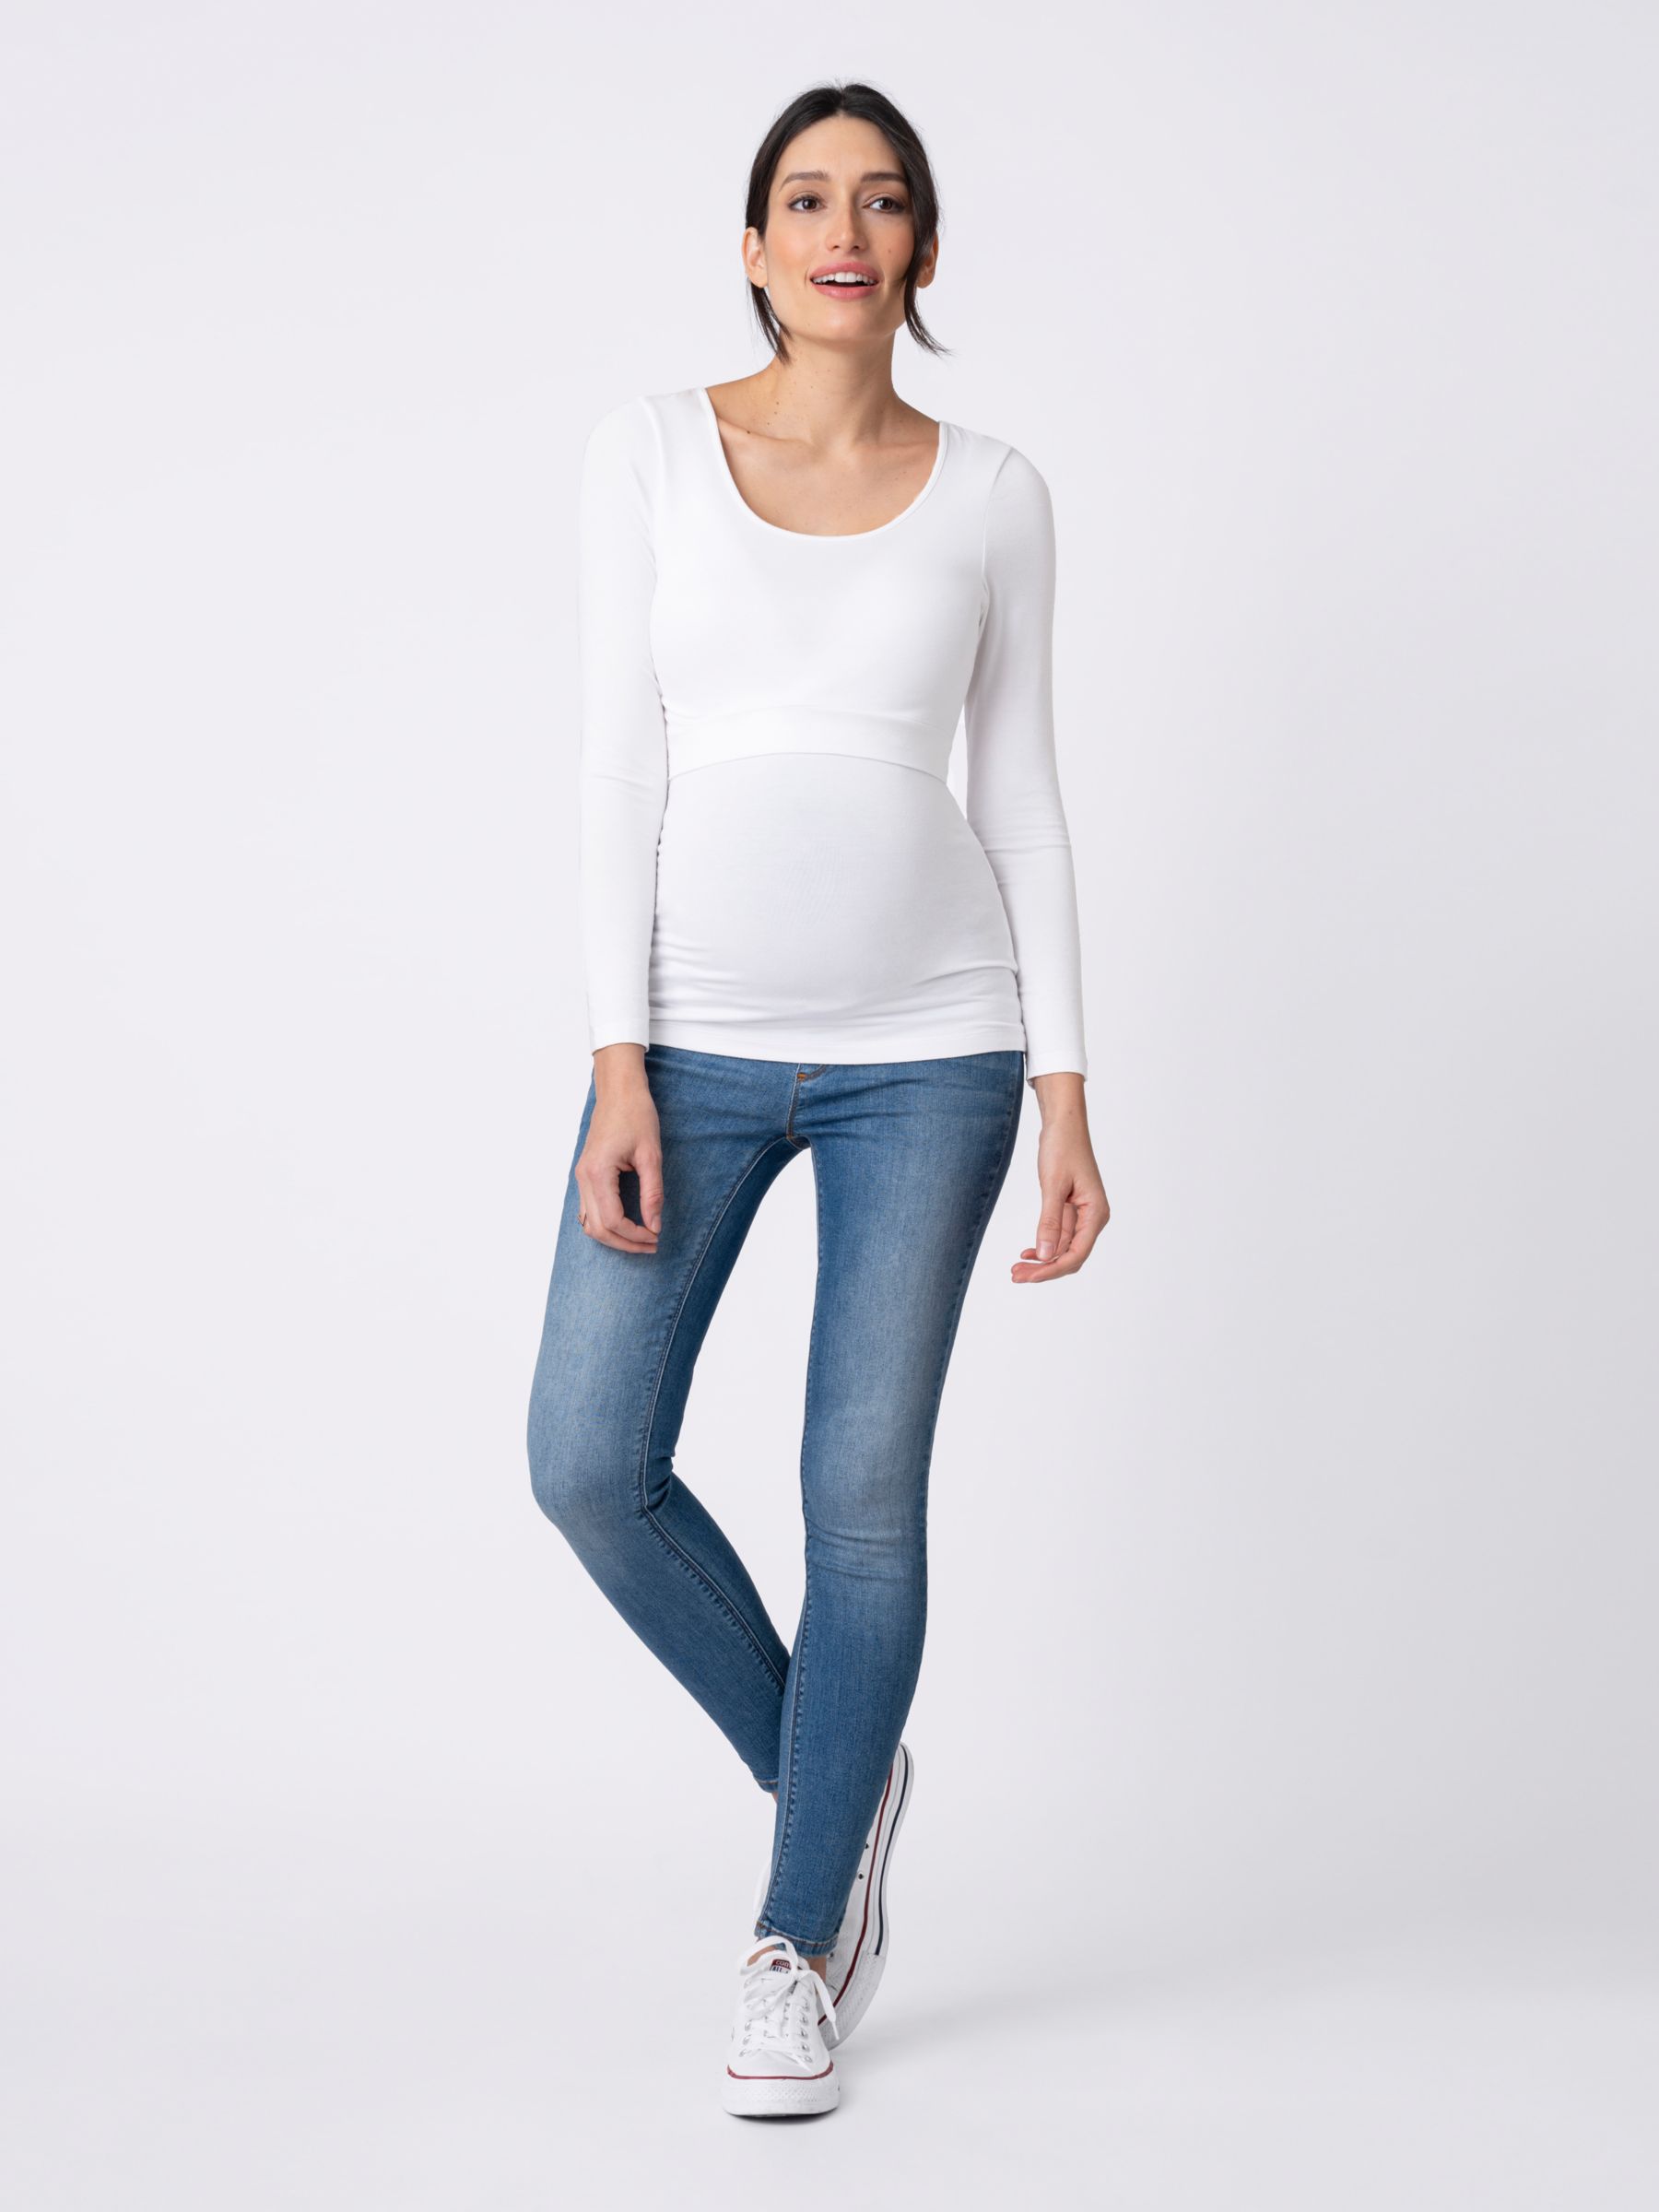 Buy Seraphine Long Sleeve Maternity and Nursing Top, Pack of 2, Black/White Online at johnlewis.com